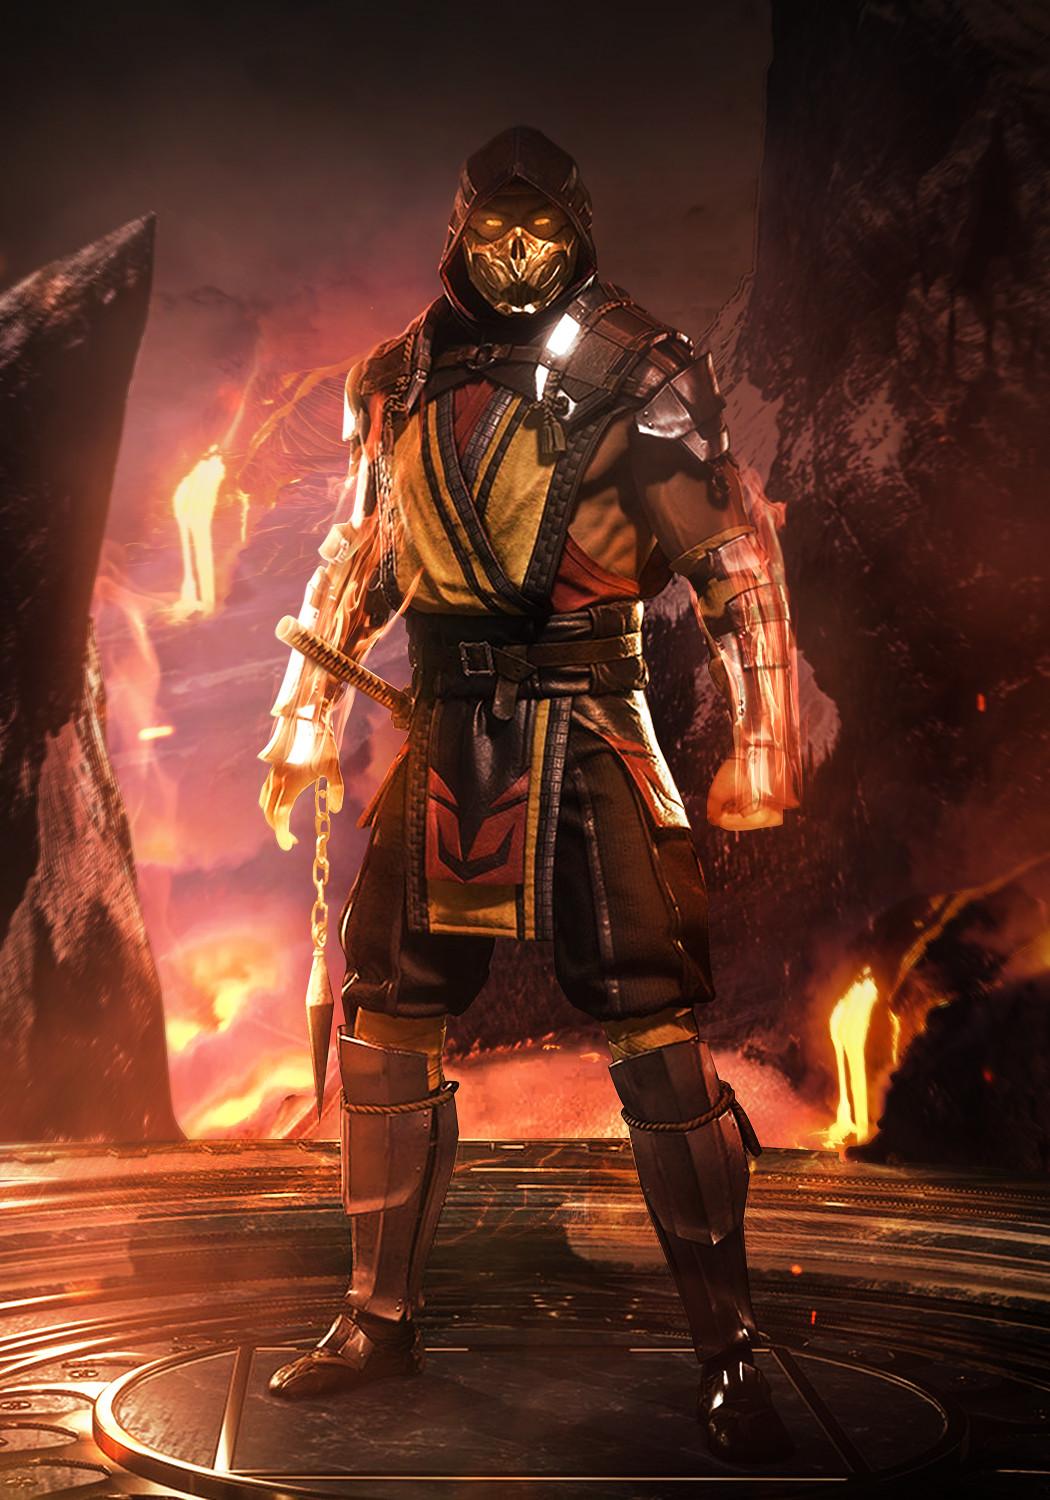 MK11 Scorpion render. Test Your Might